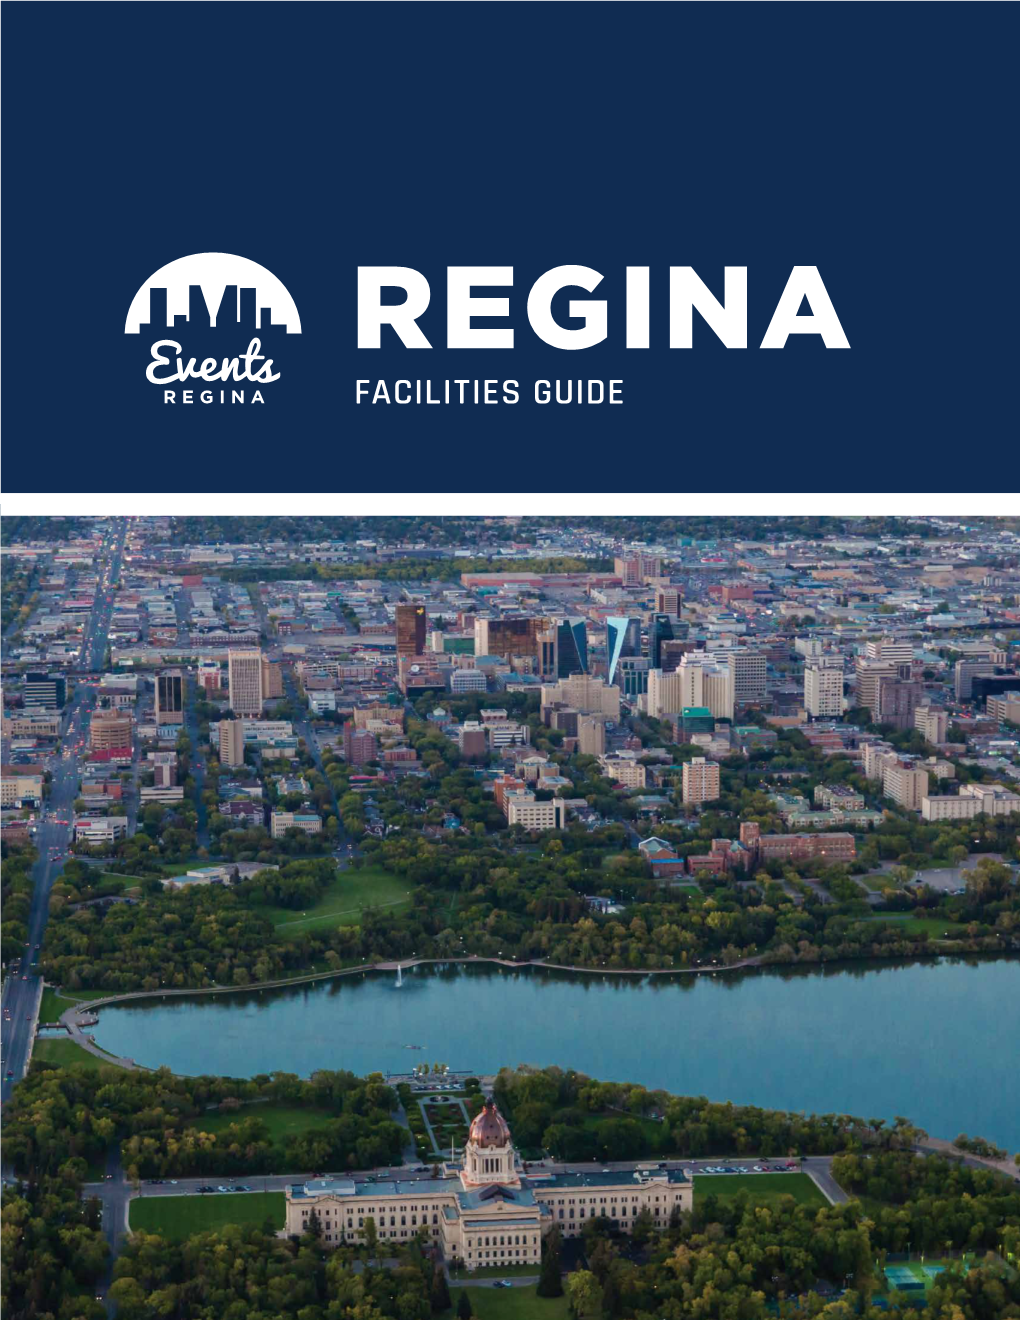 FACILITIES GUIDE WELCOME Regina Has a Track Record of Being an Exquisite and Desirable Destination to Host World-Class National and International Events